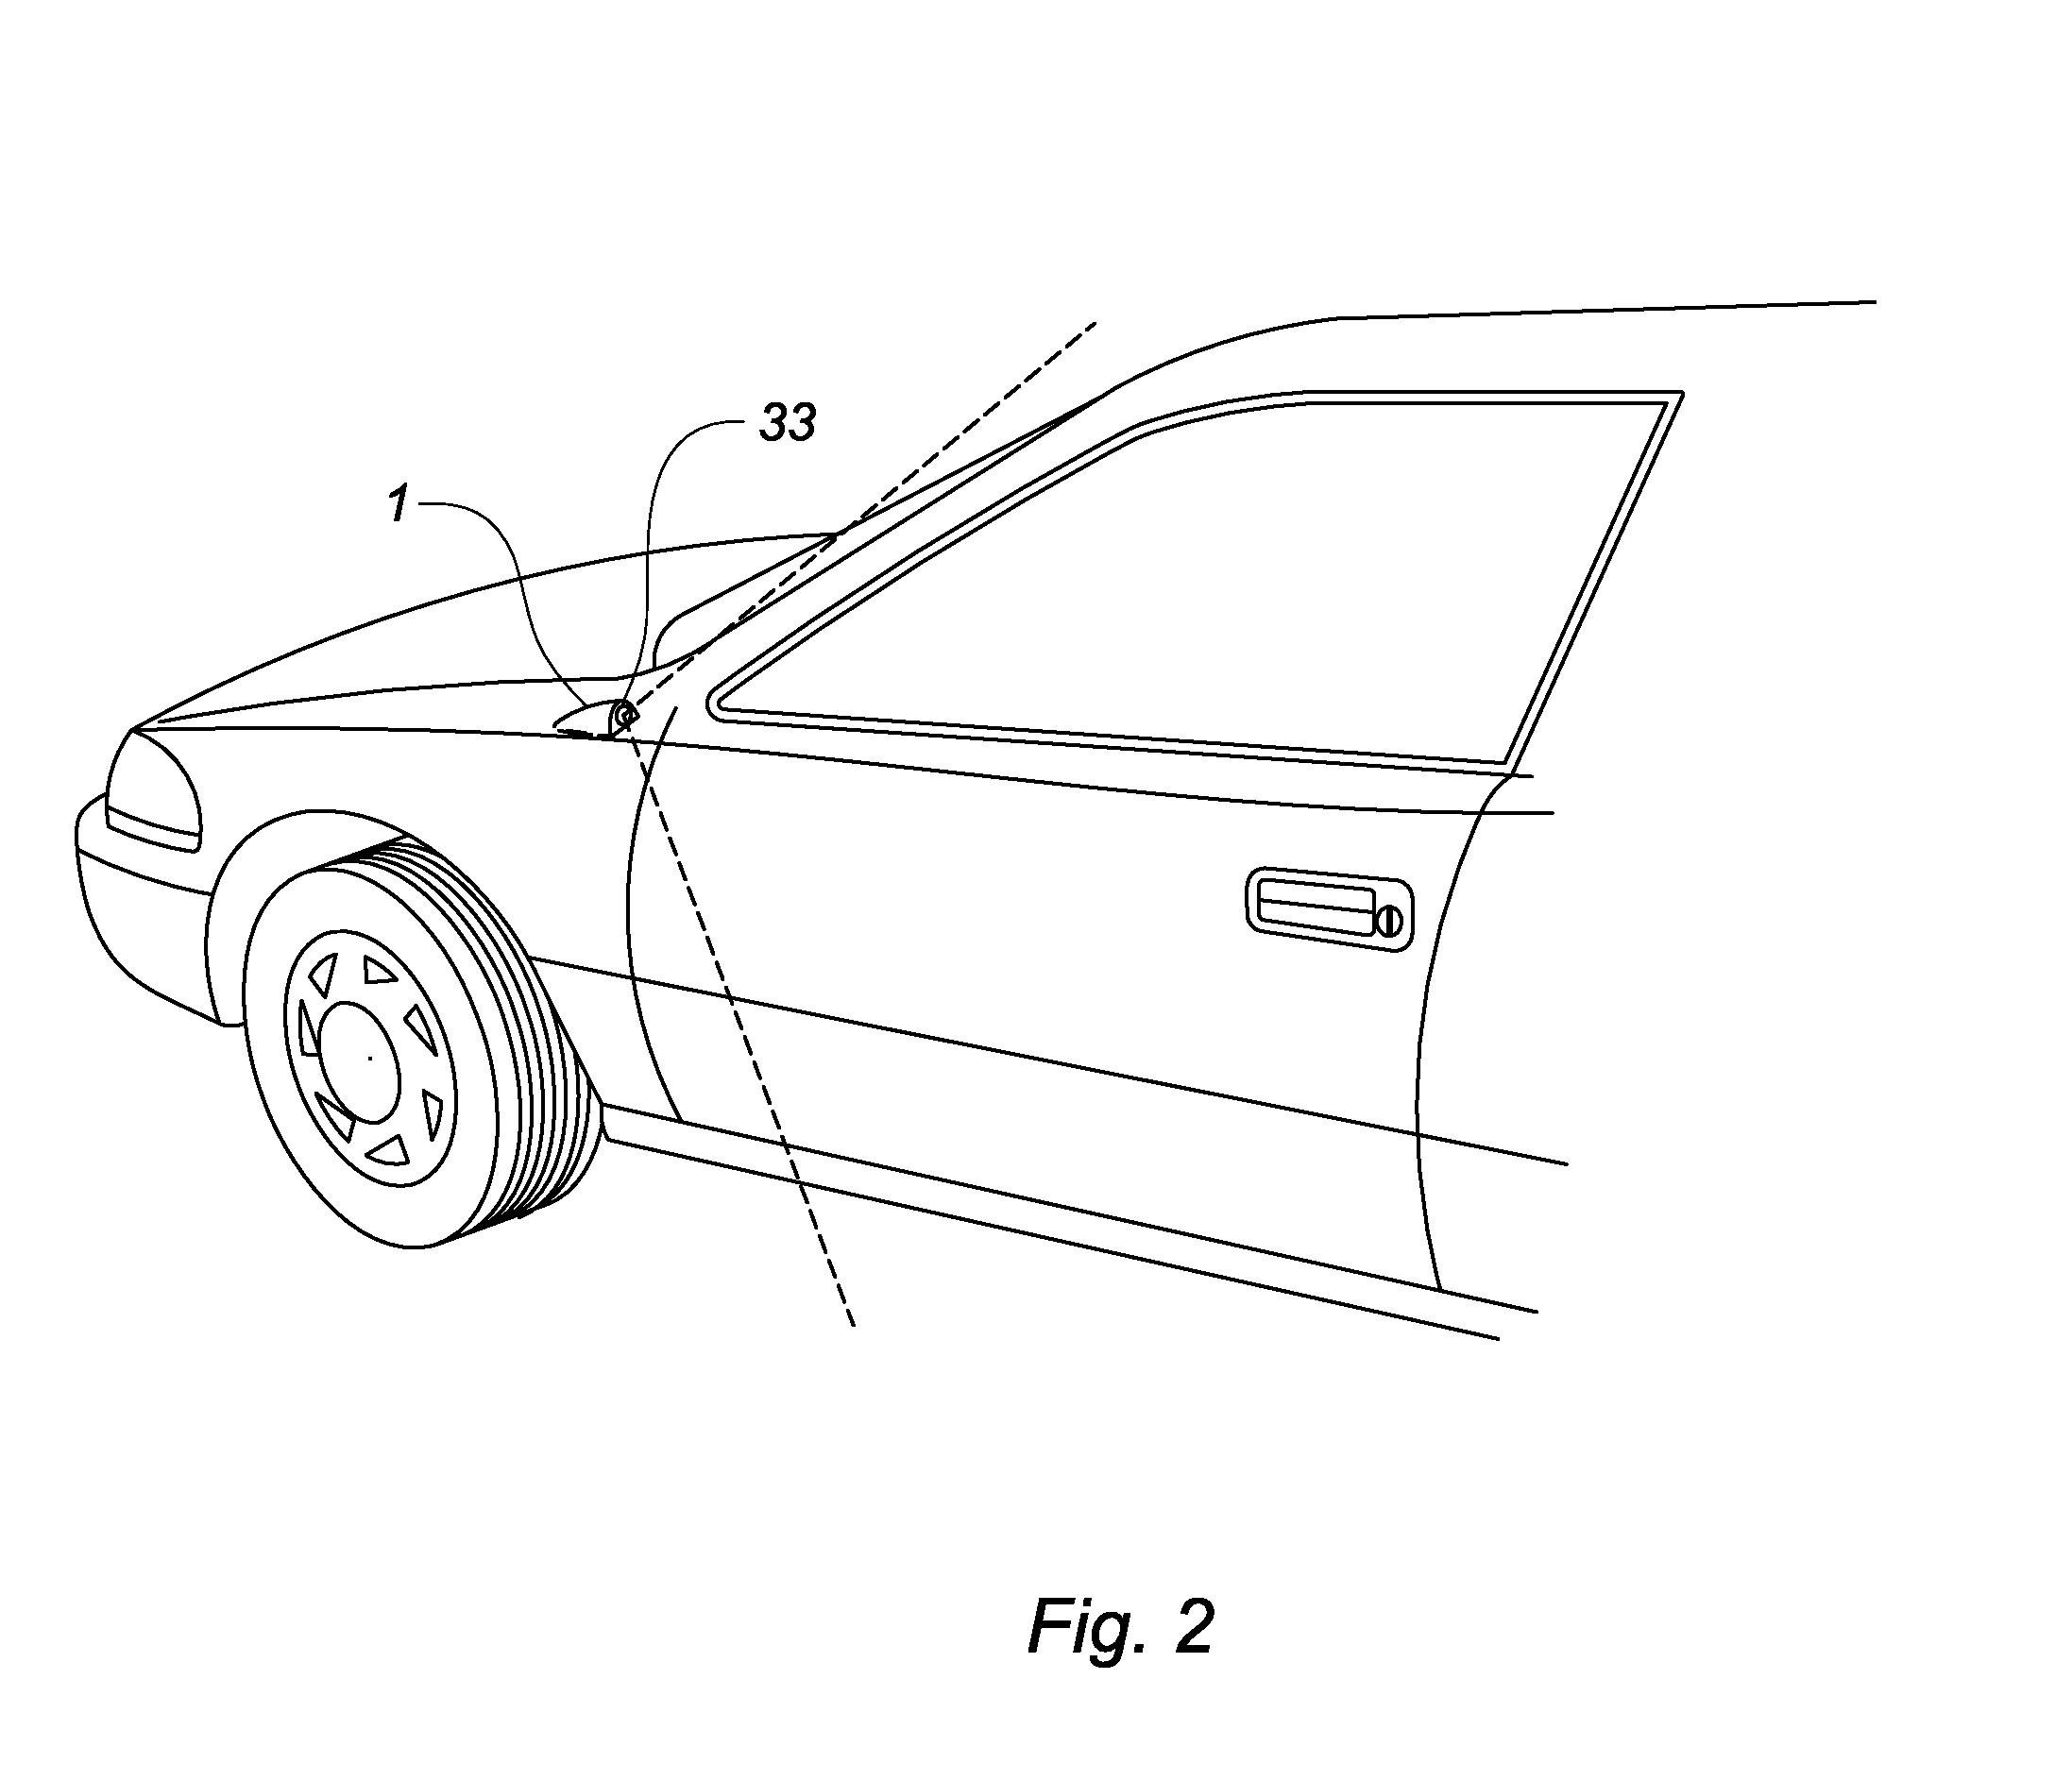 Peripheral viewing system for a vehicle